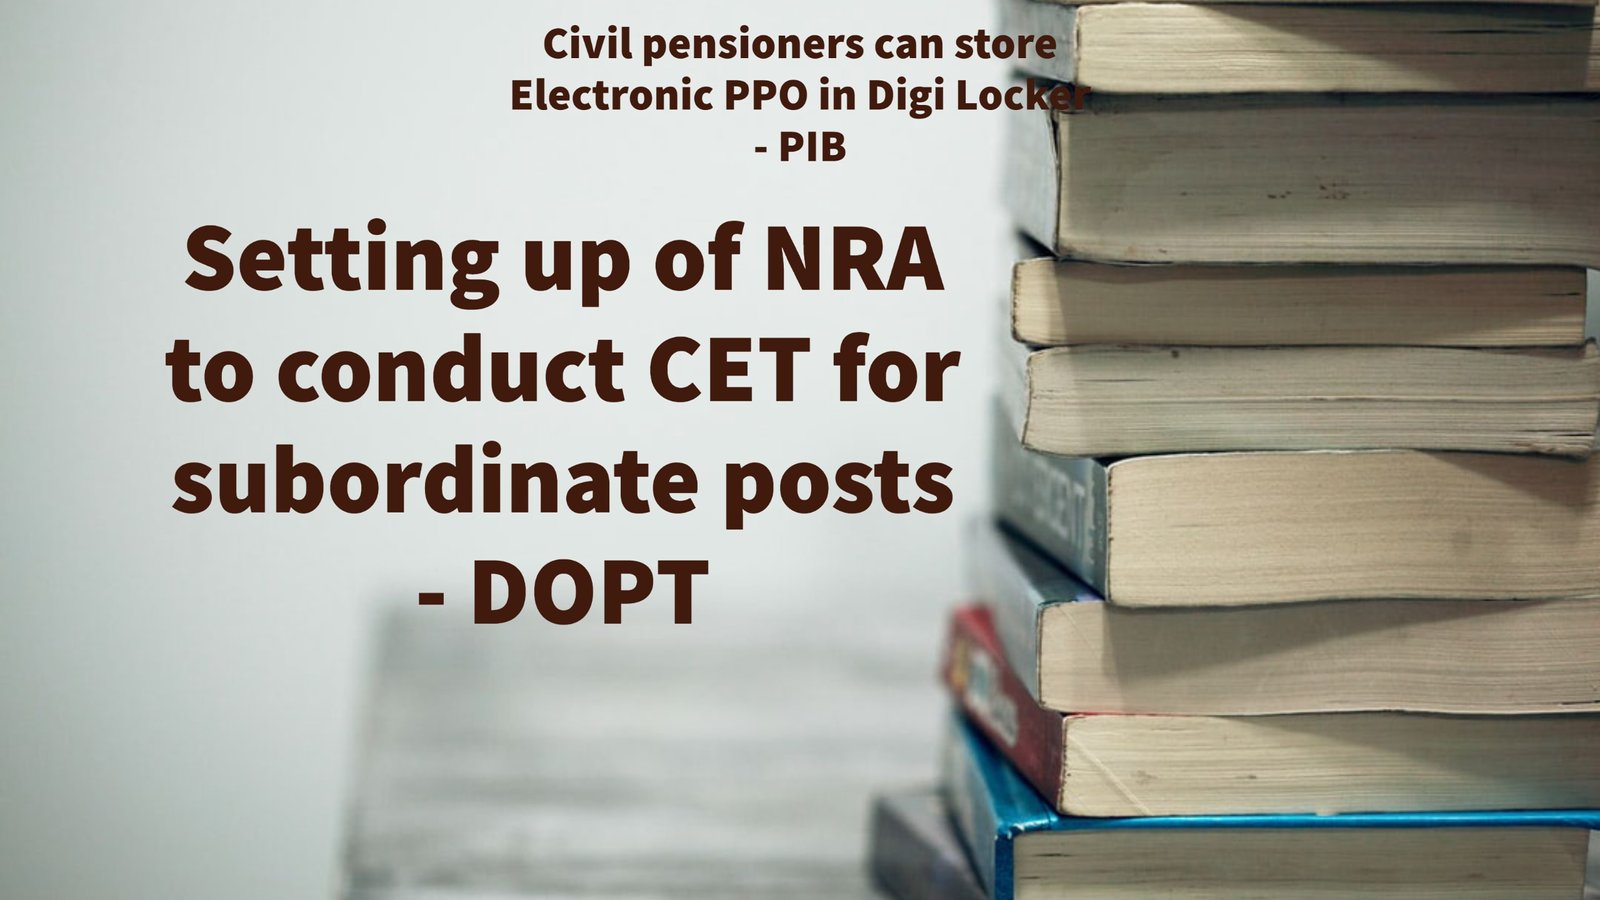 Setting up of NRA to conduct CET for subordinate posts - DOPT